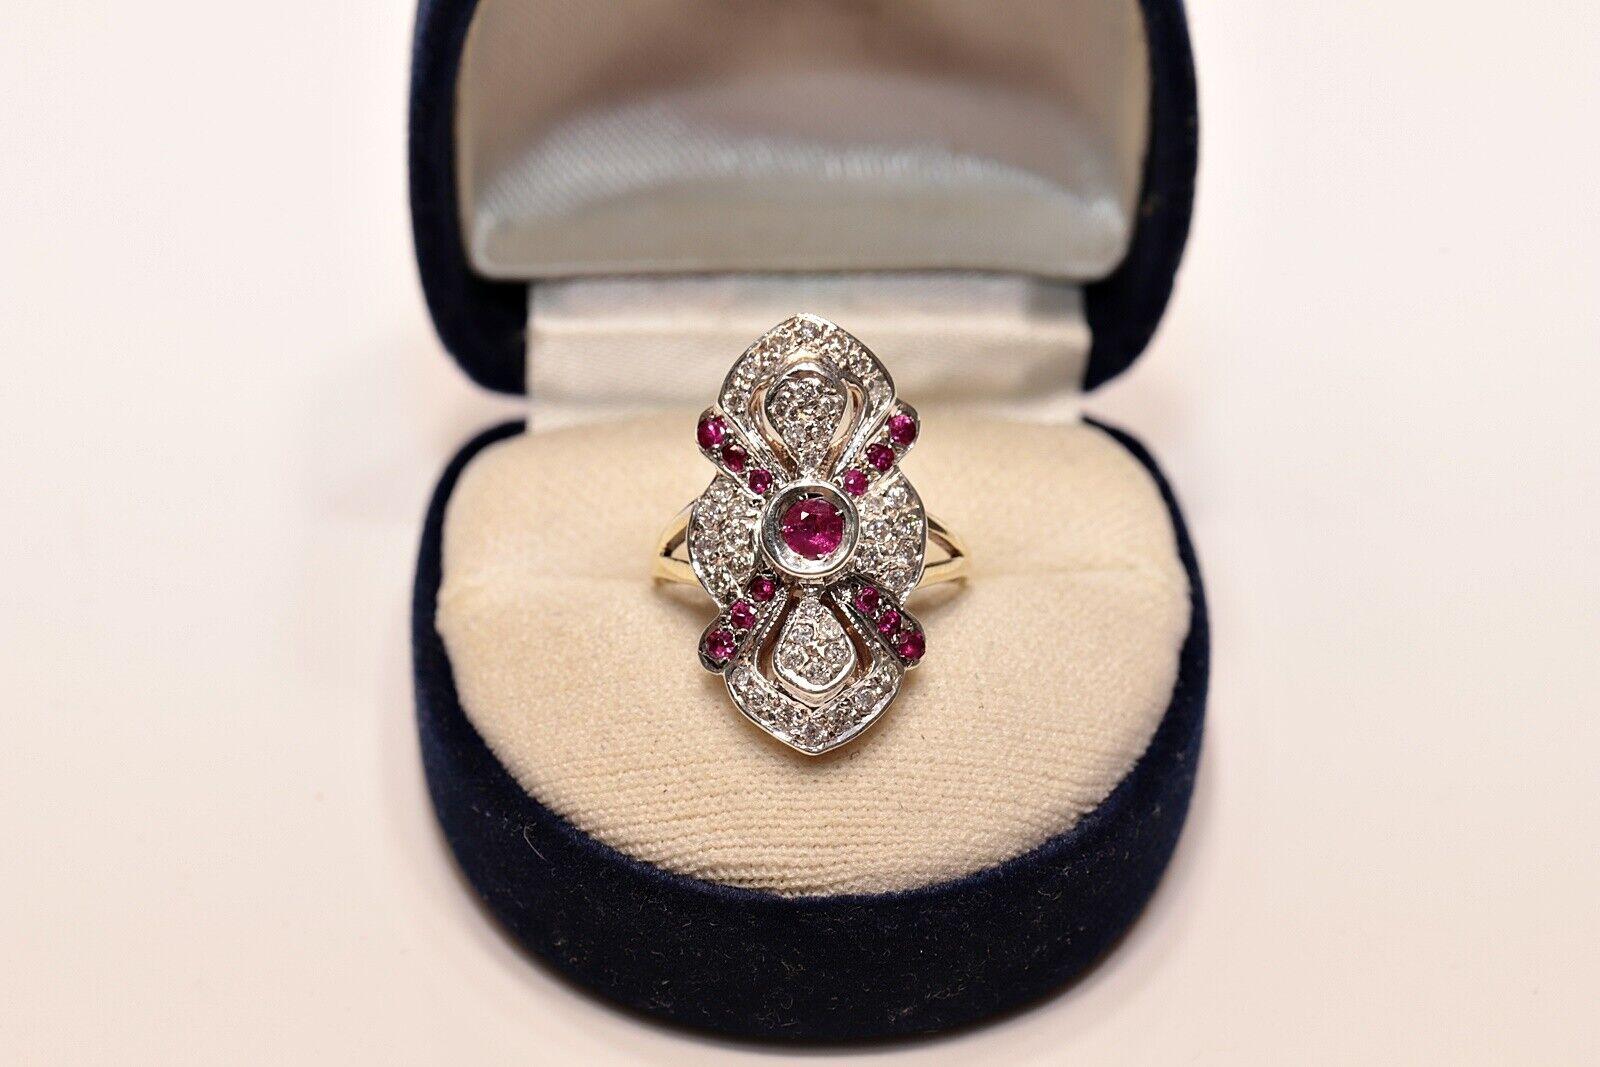 In very good condition.
Total weight 5.9 grams.
Totally is diamond 0.60 carat.
The diamond is has vvs-vs clarity and G-H color.
Totally is ruby  0.40 carat.
Ring size is US 6.3 (We offer free resizing)
We can make any size.
Box is not